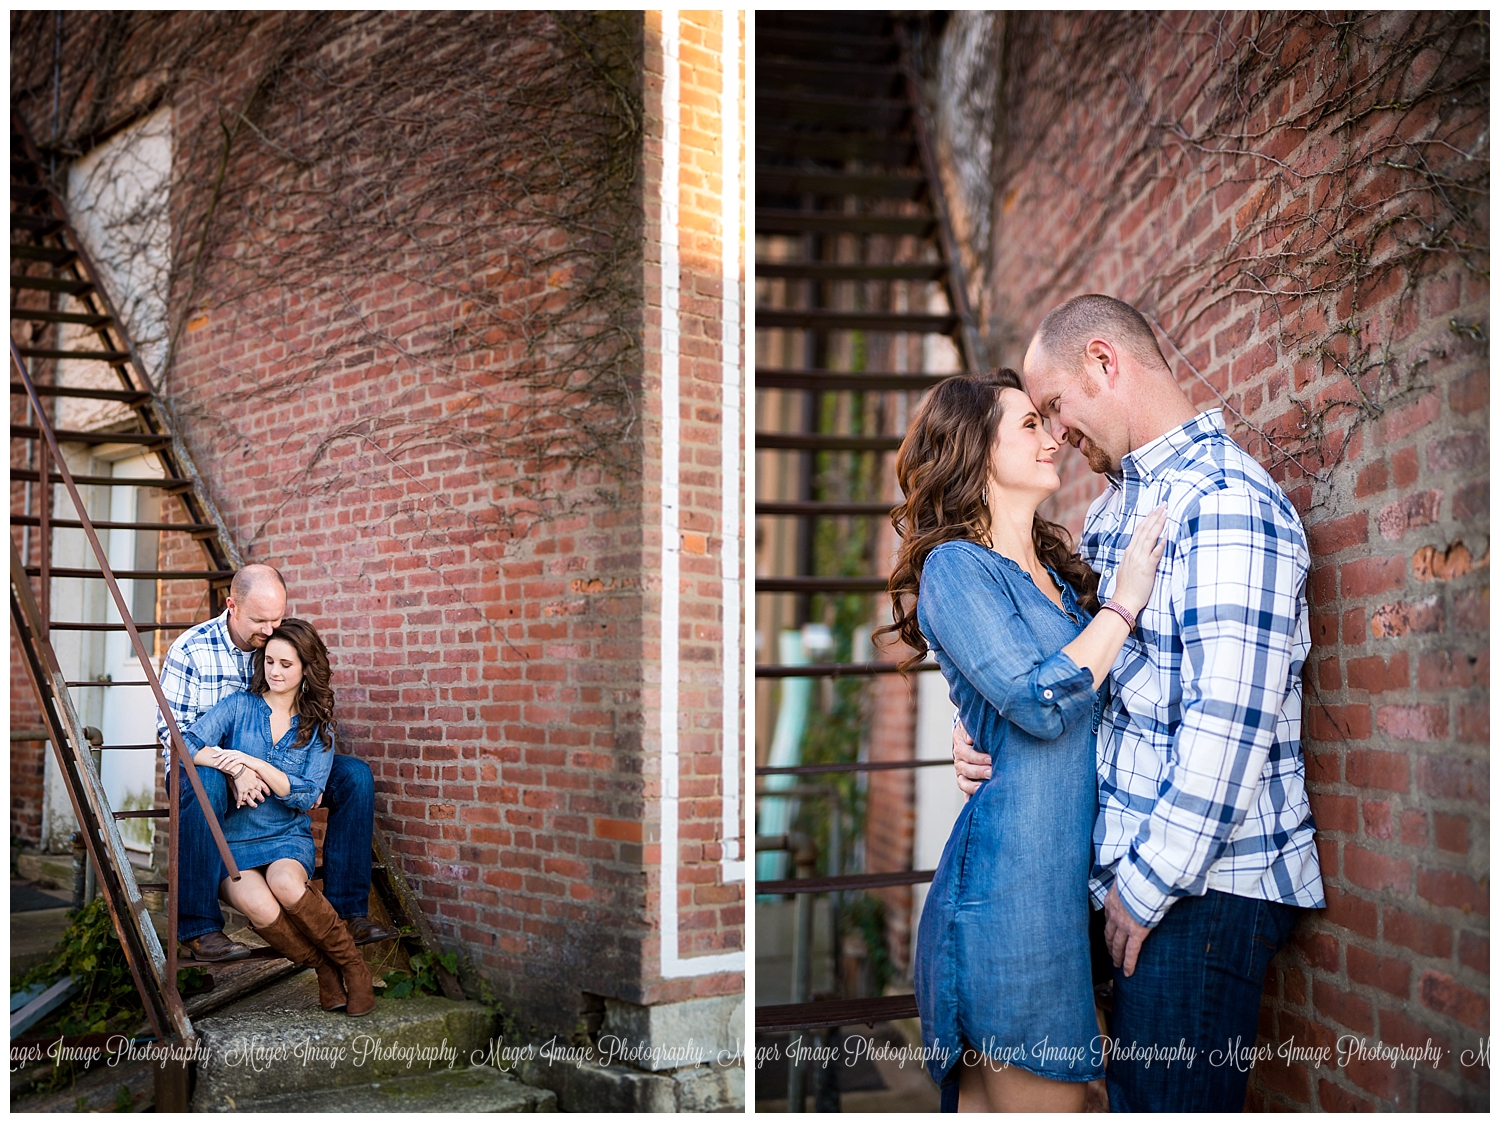 back alley couple photo stairs fire escape pose